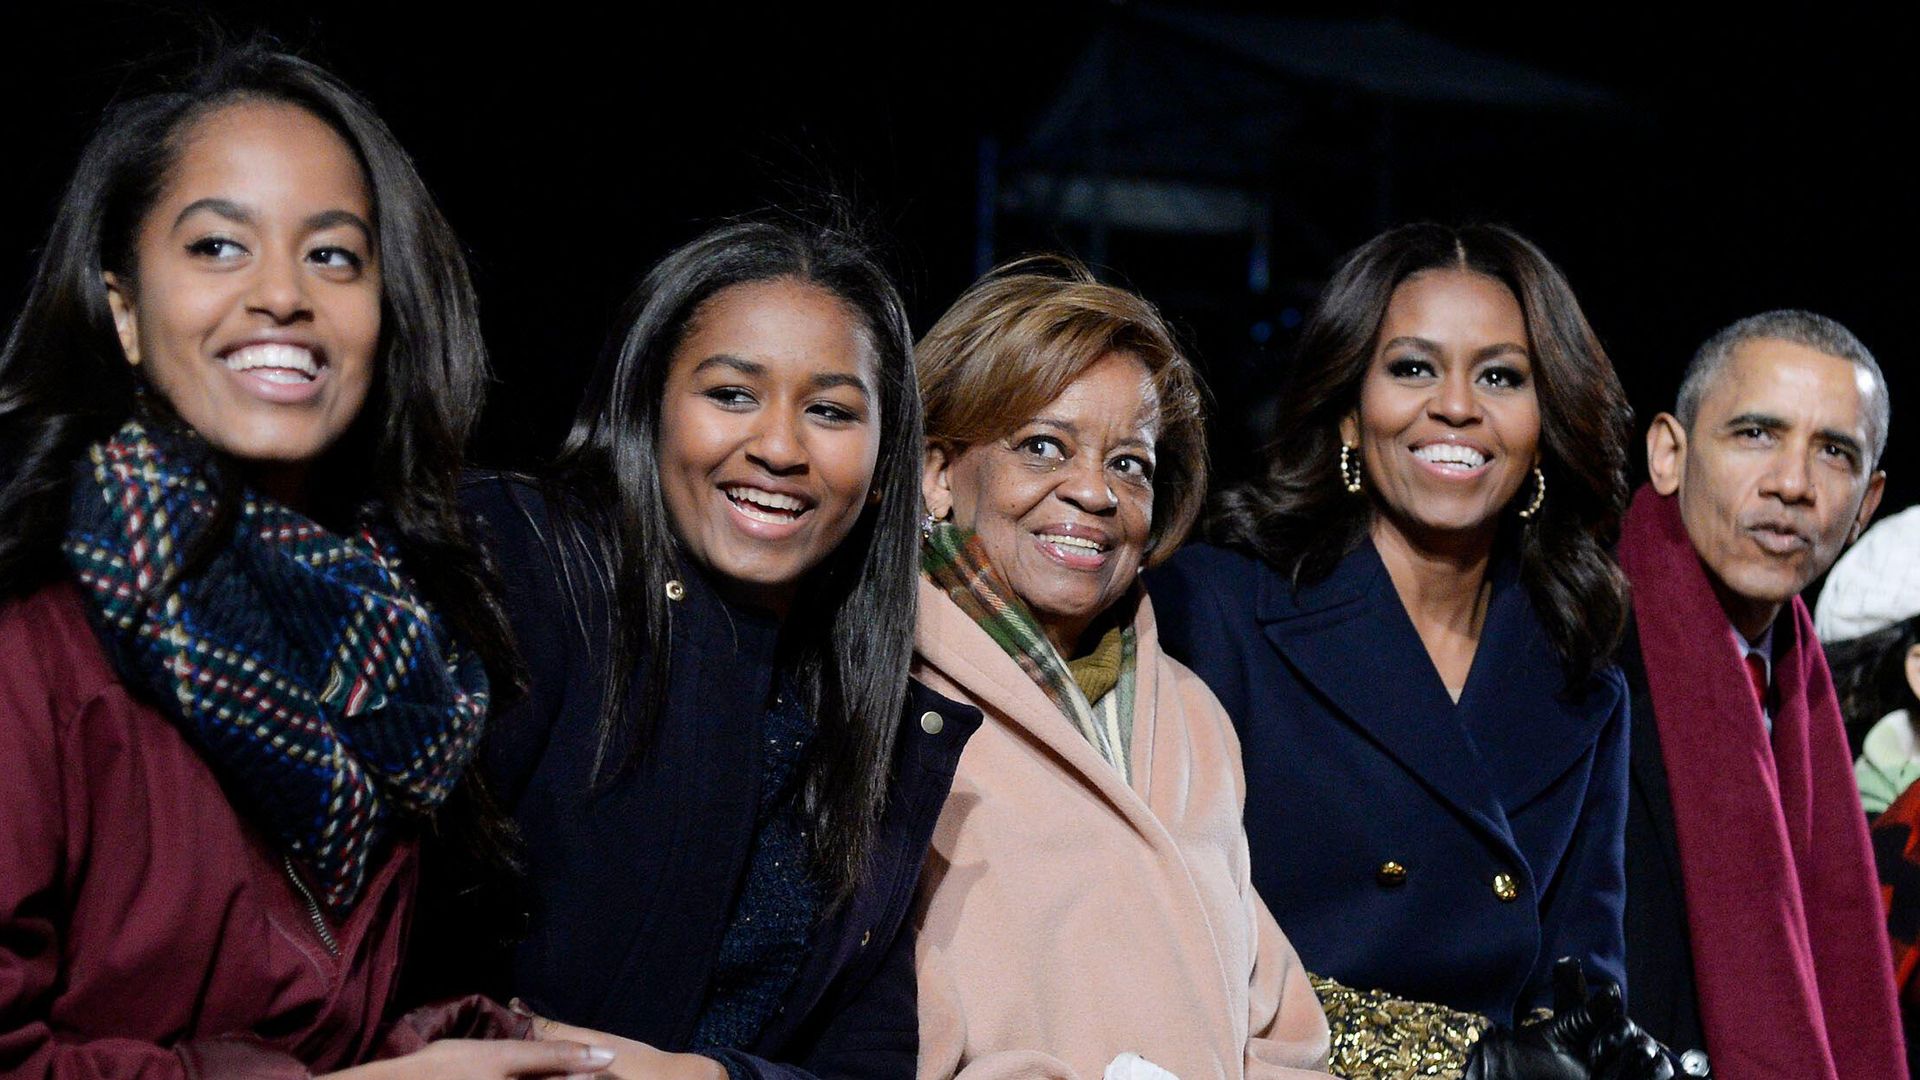 How Michelle Obama's late mother Marian raised granddaughters Malia and Sasha in the White House — inside their bond